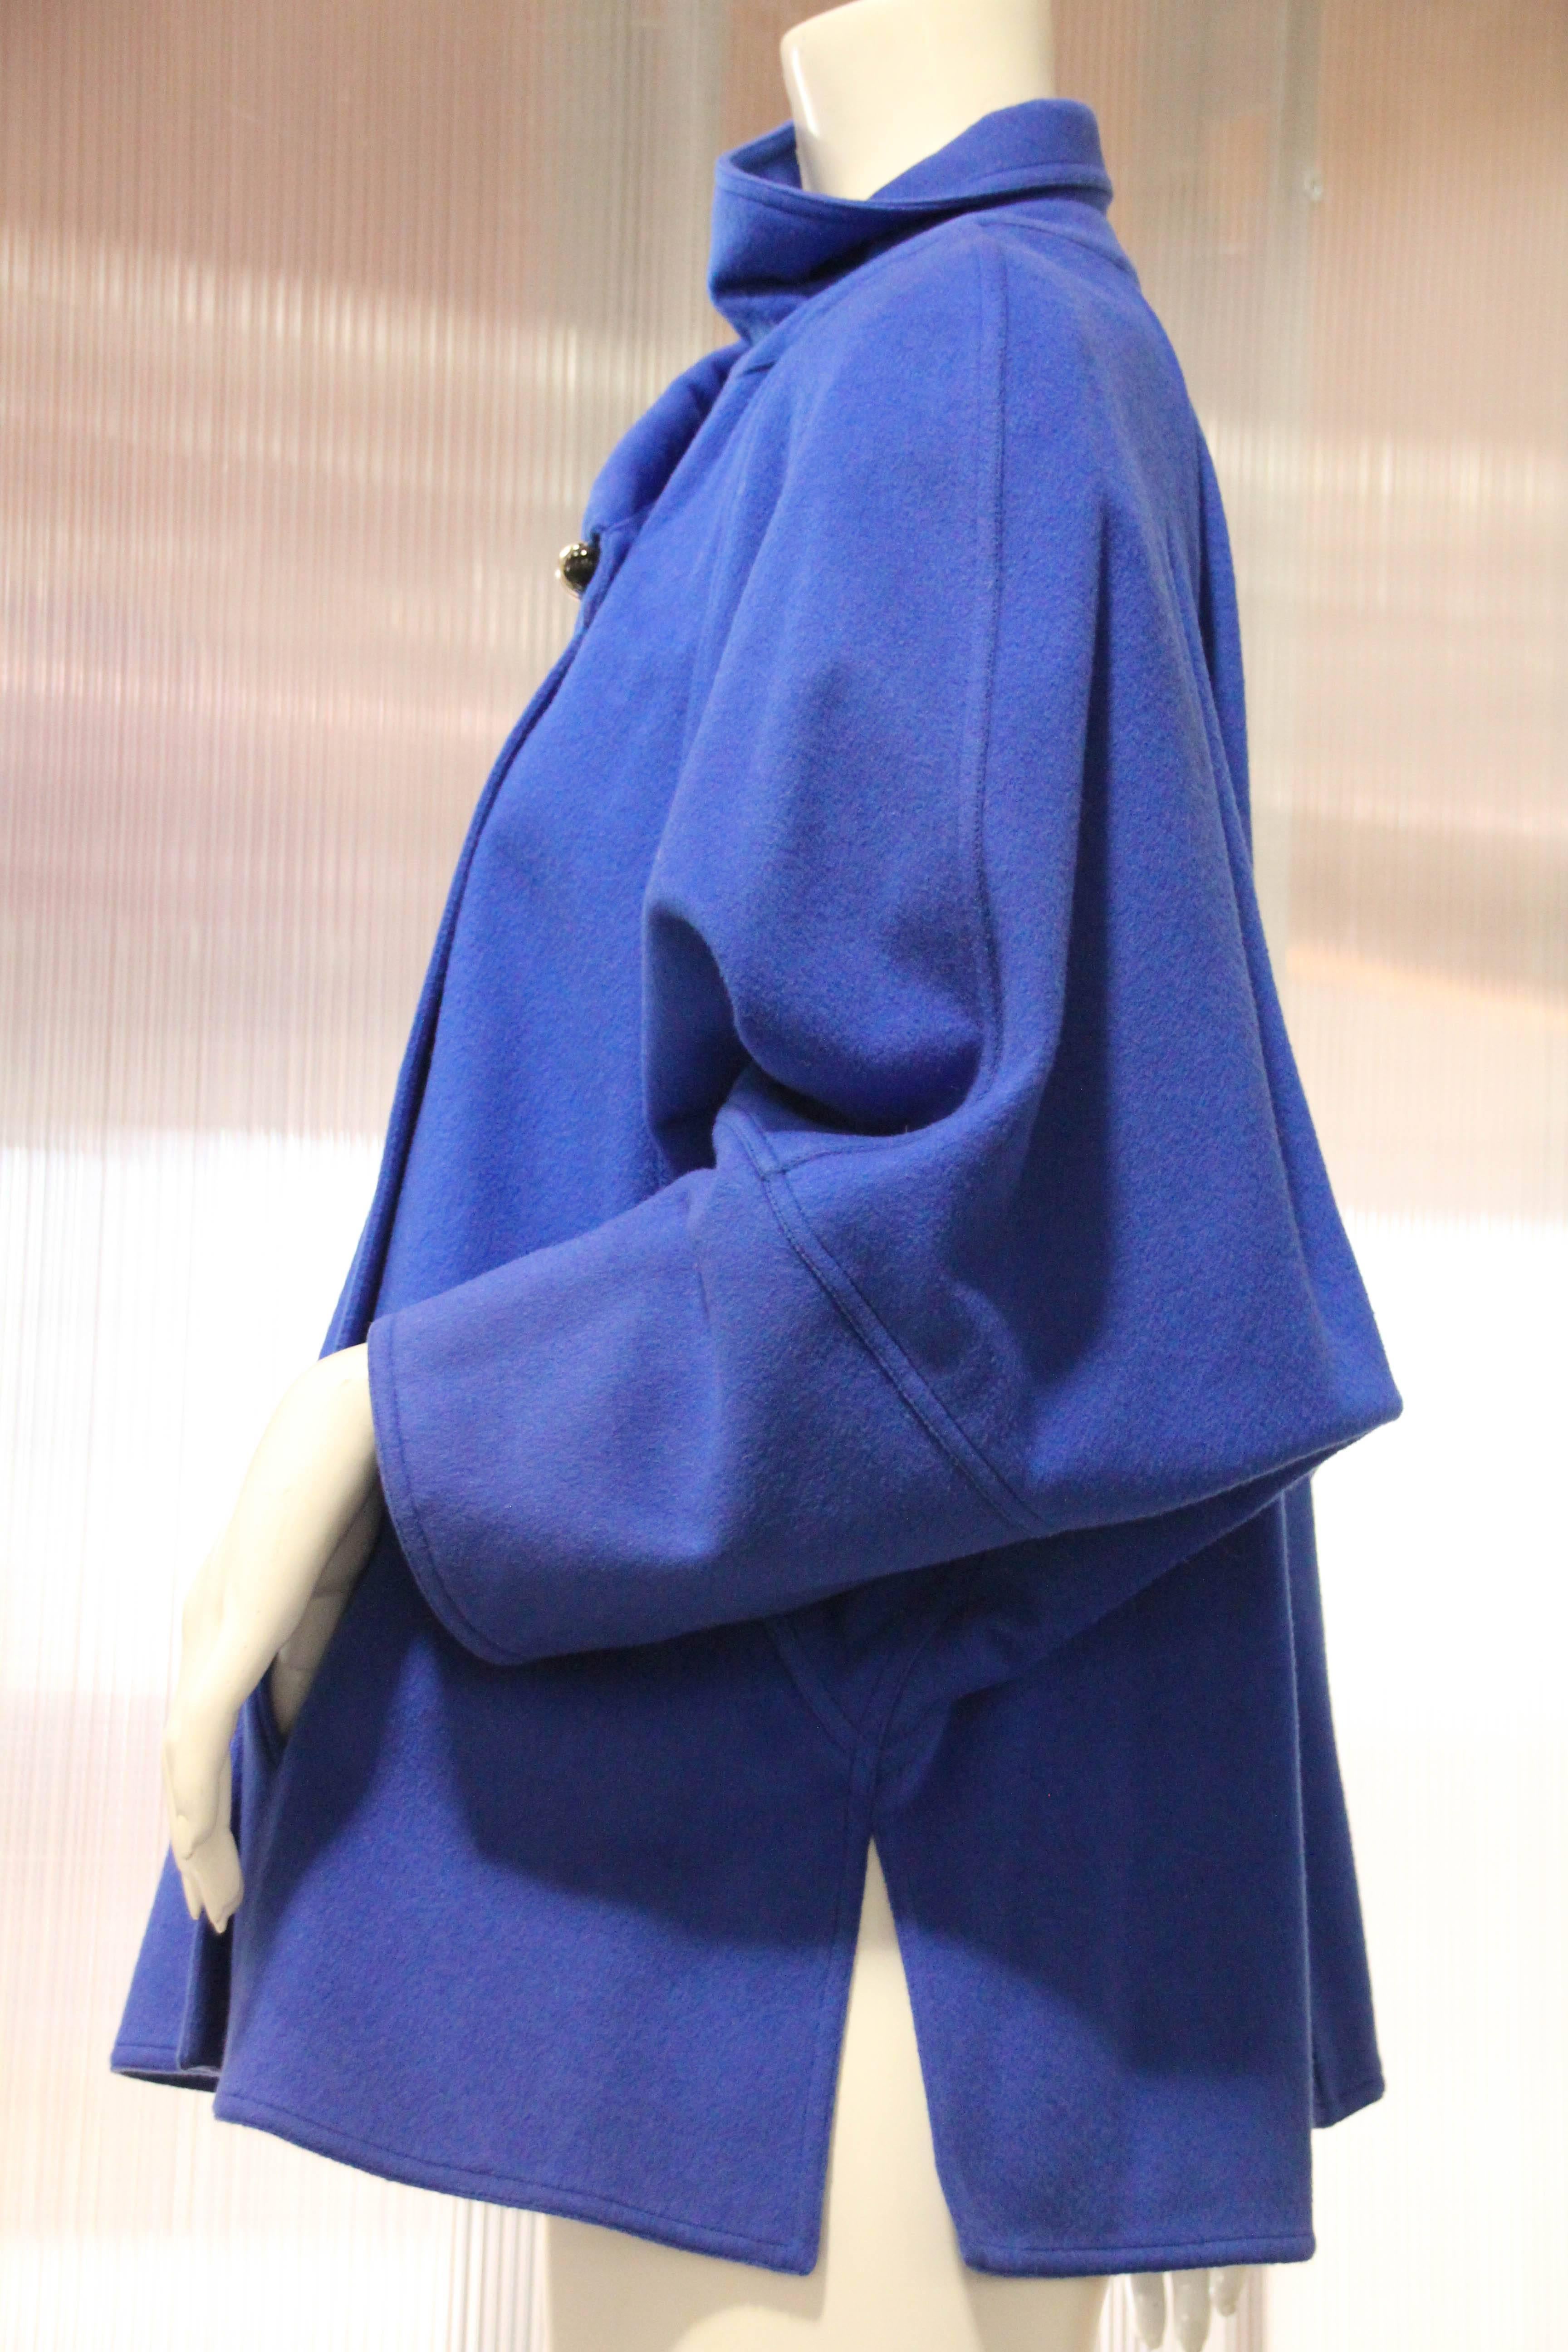 1980s Chloe electric blue wool felt swing coat with Chinese-inspired silhouette: asymmetrical collar treatment and one toggle button. Fully lined.  Full raglan sleeve. Smock style fit.